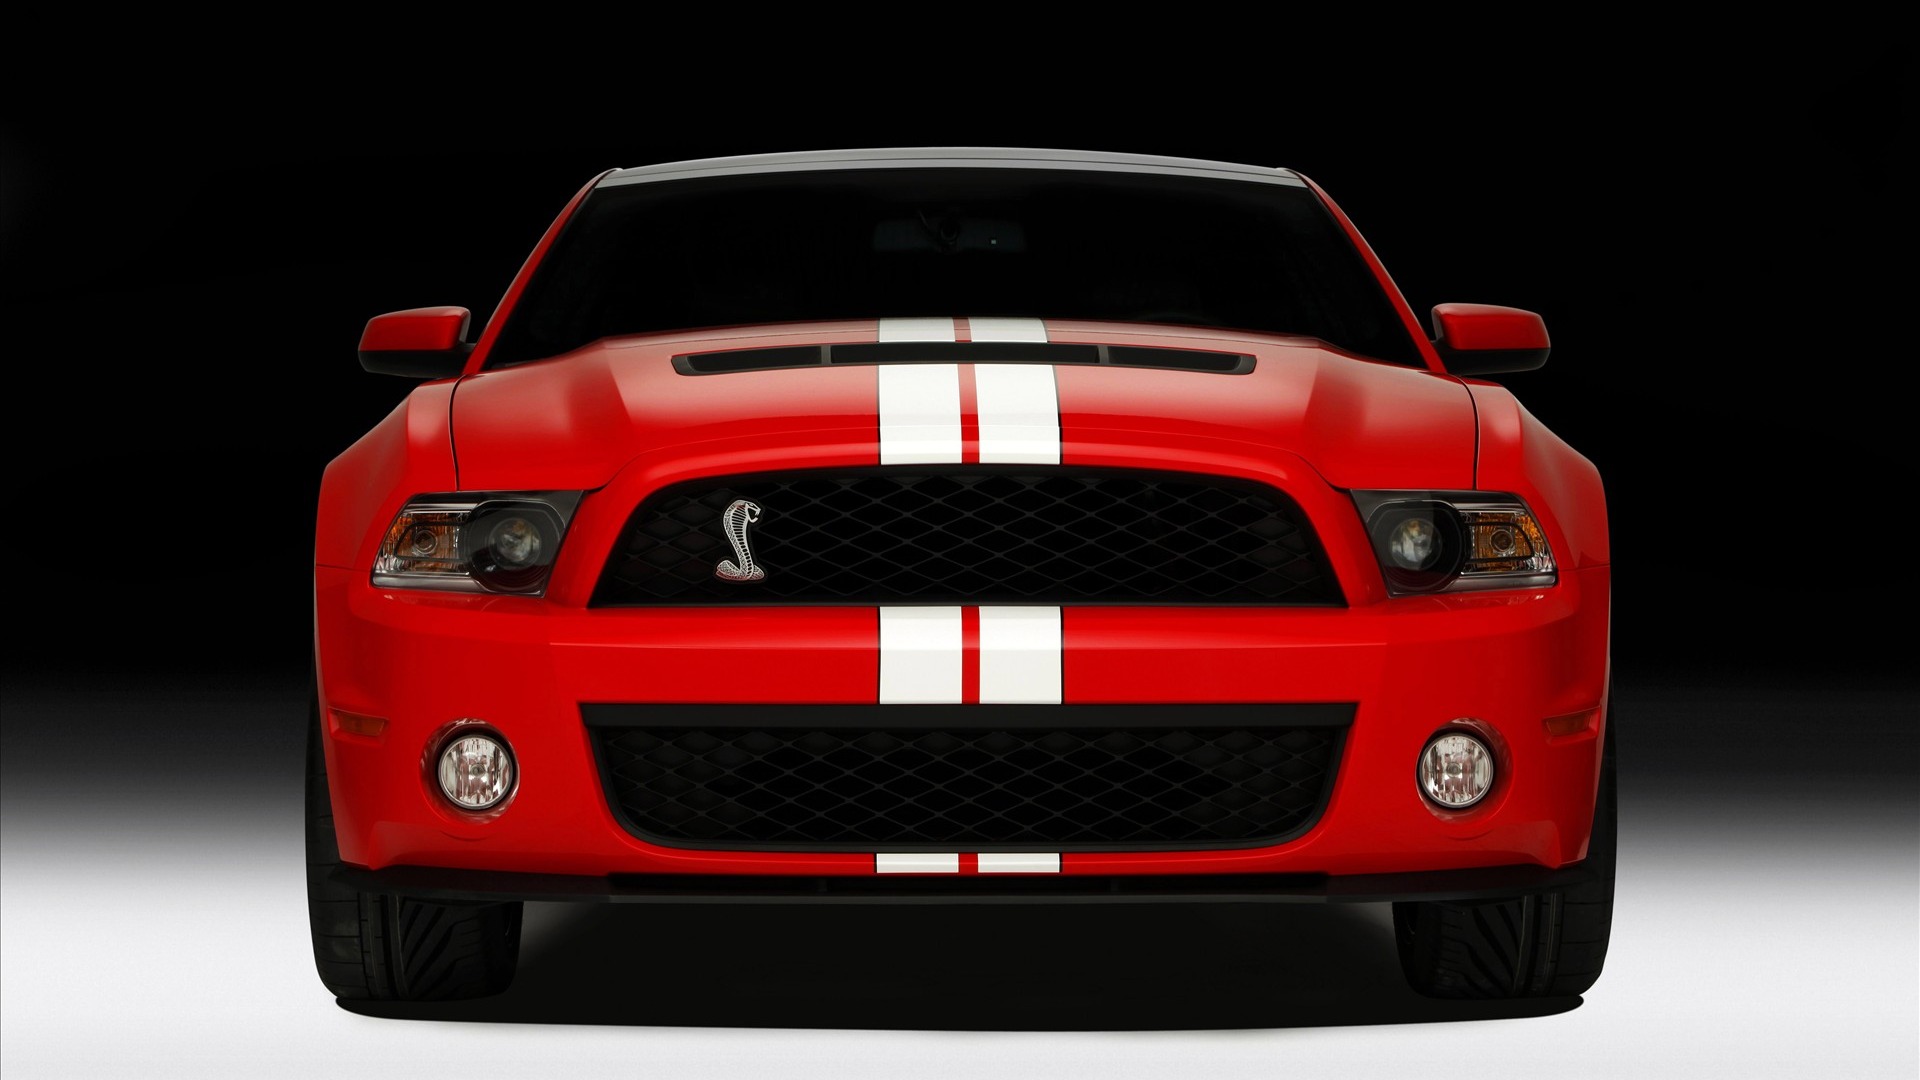 Ford Mustang GT500 Wallpapers #5 - 1920x1080